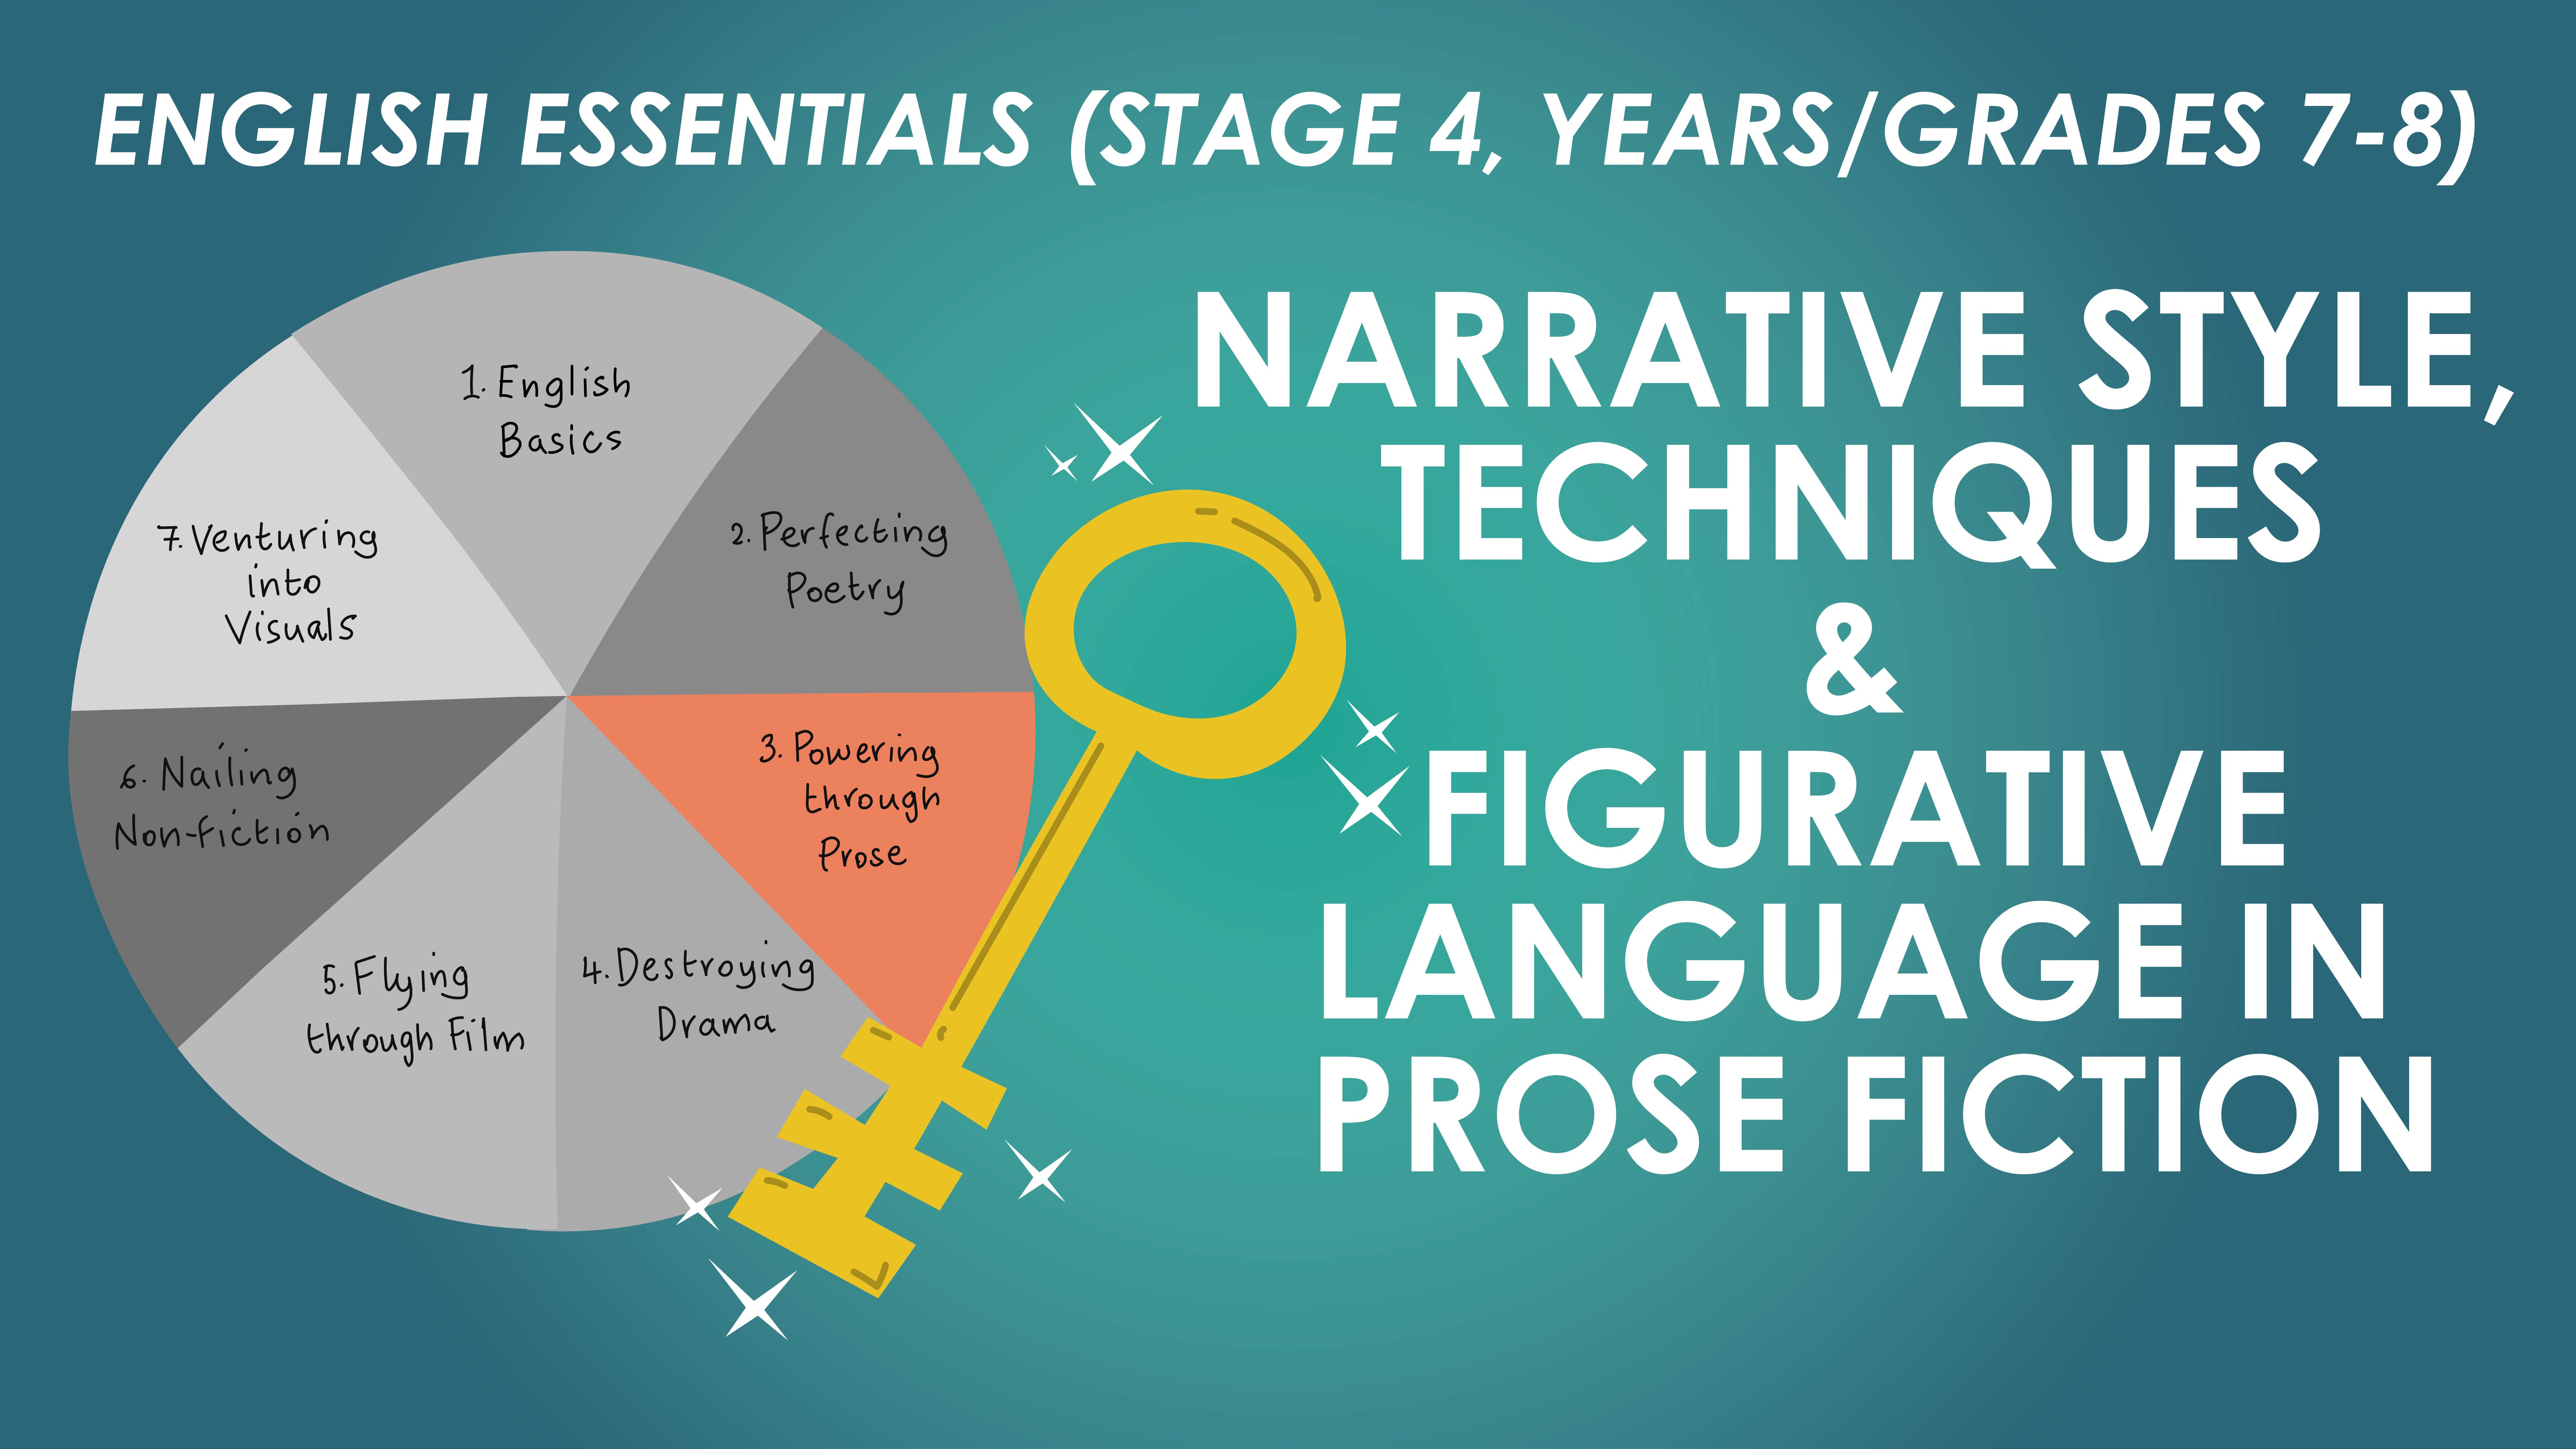 English Essentials - Powering Through Prose - Narrative Style, Techniques & Figurative Language in Prose Fiction (Stage 4, Years/Grades 7-8)